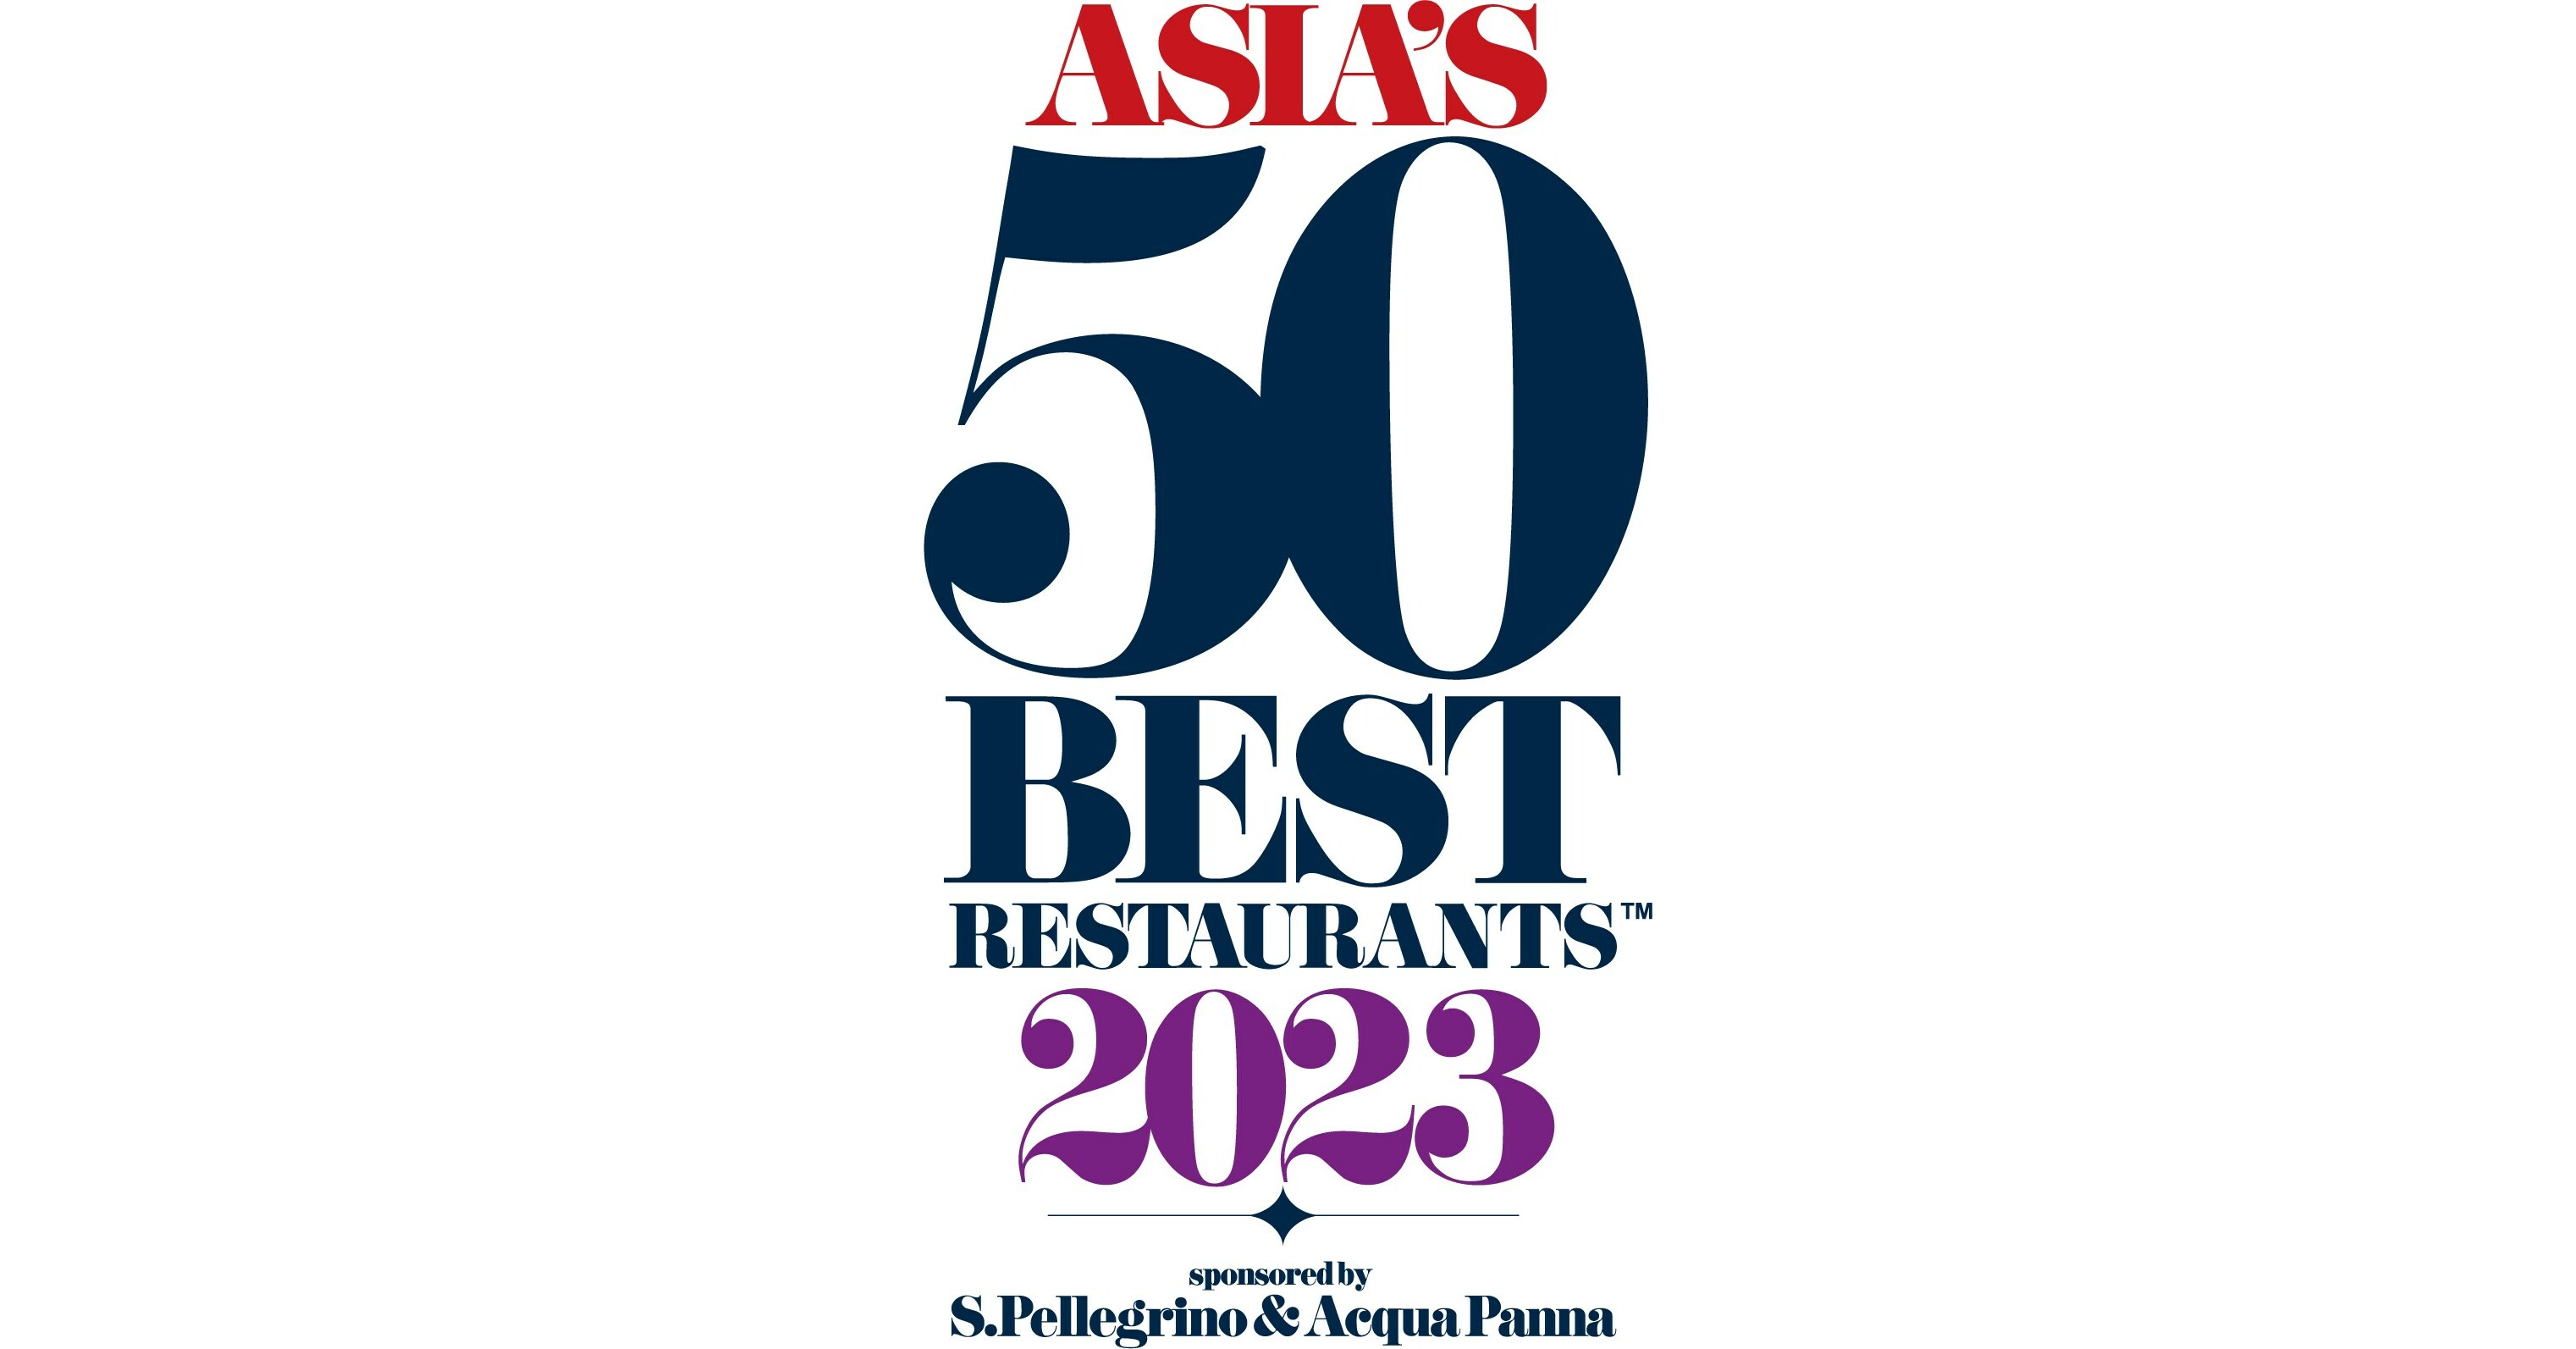 AUGUST IN JAKARTA WINS ASIA'S 50 BEST RESTAURANTS' COVETED AMERICAN